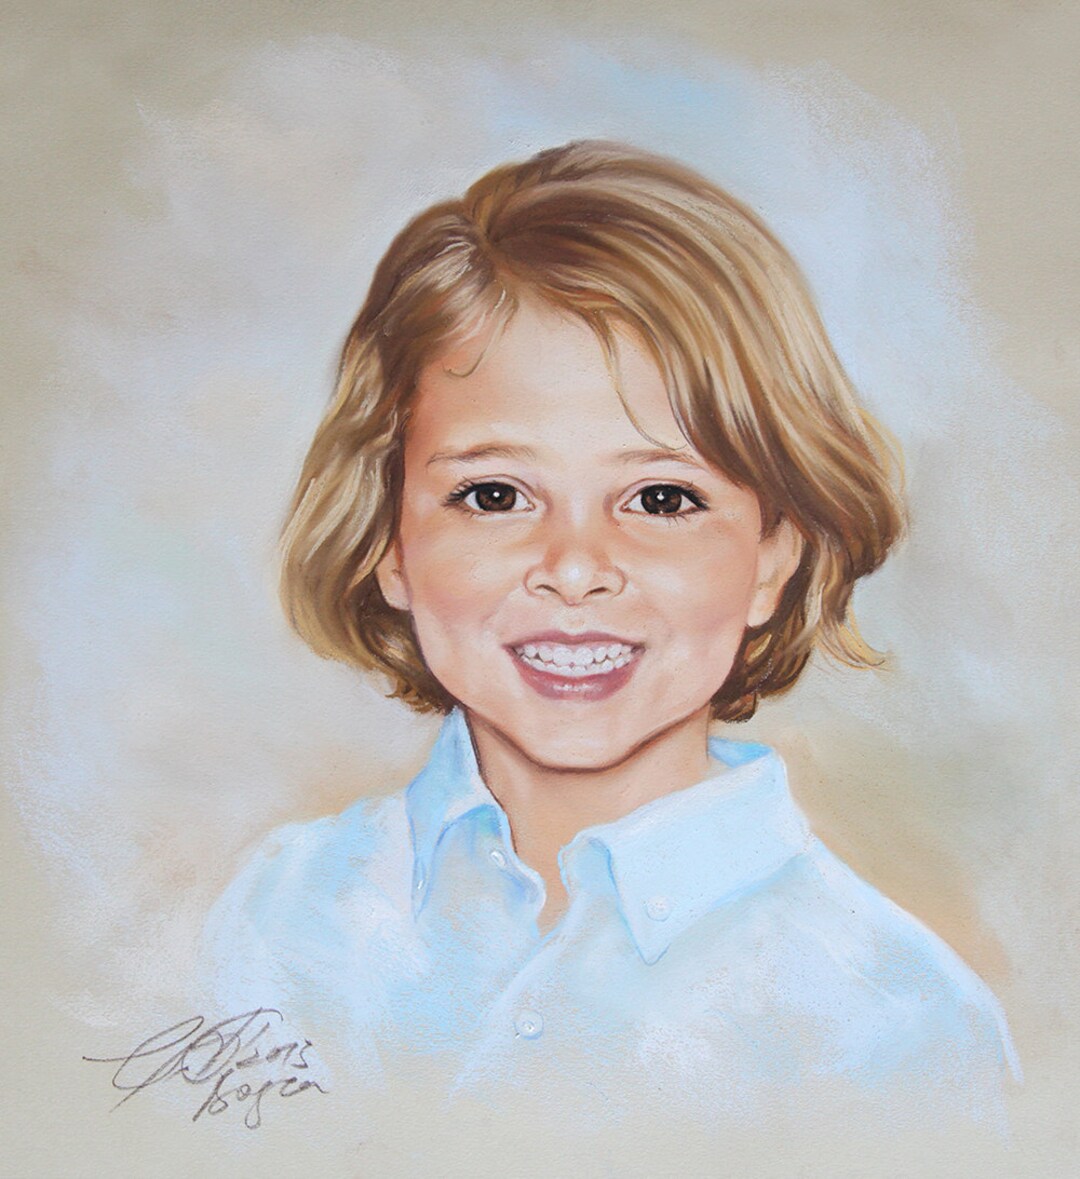 Pastel Portrait Commission of a Child 19.5x195 Inches - Etsy